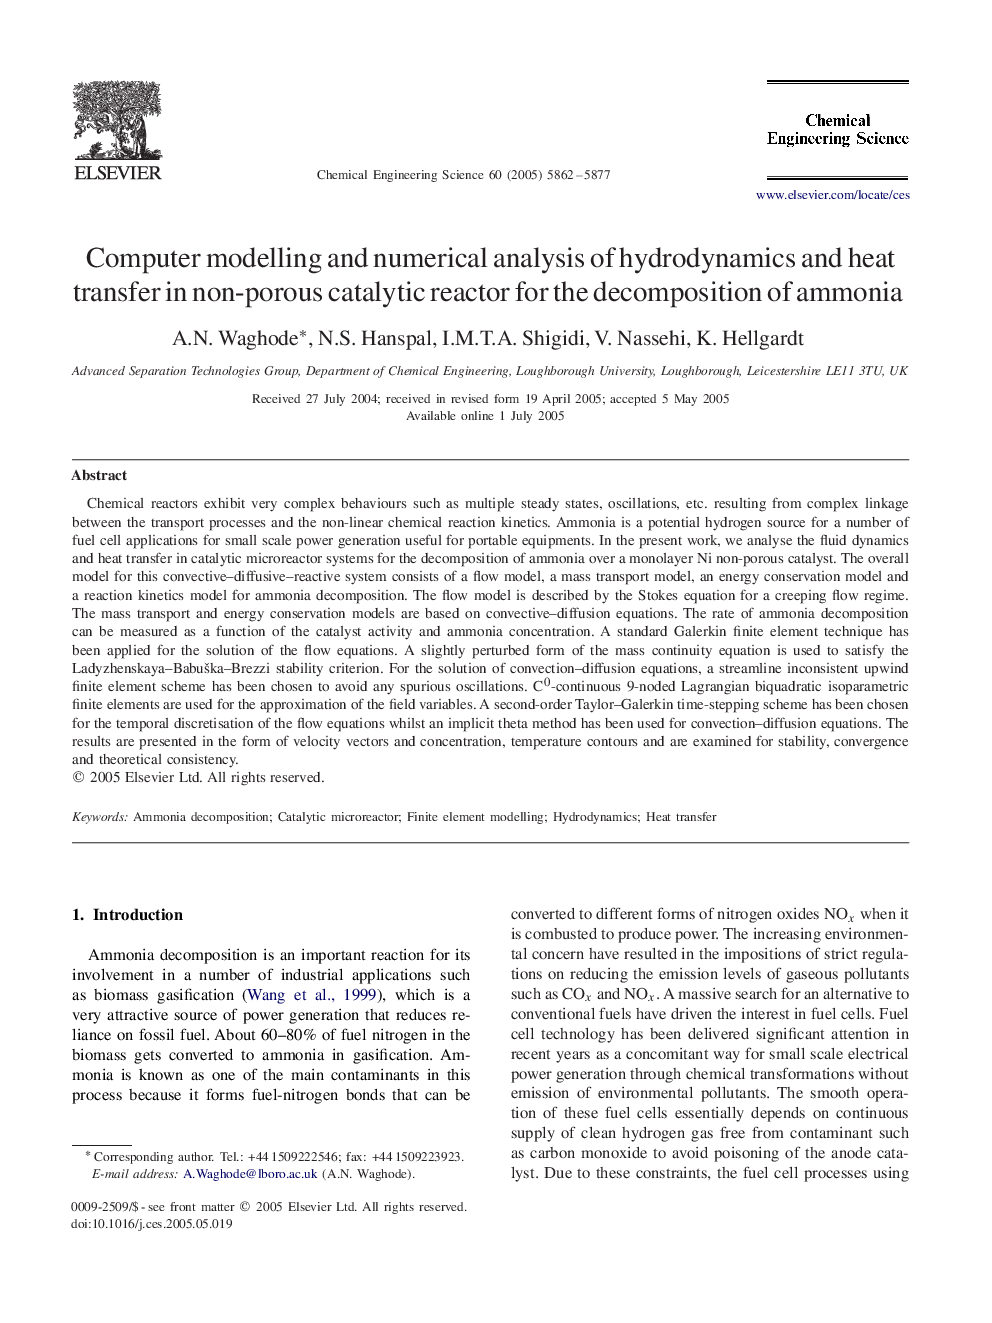 Computer modelling and numerical analysis of hydrodynamics and heat transfer in non-porous catalytic reactor for the decomposition of ammonia